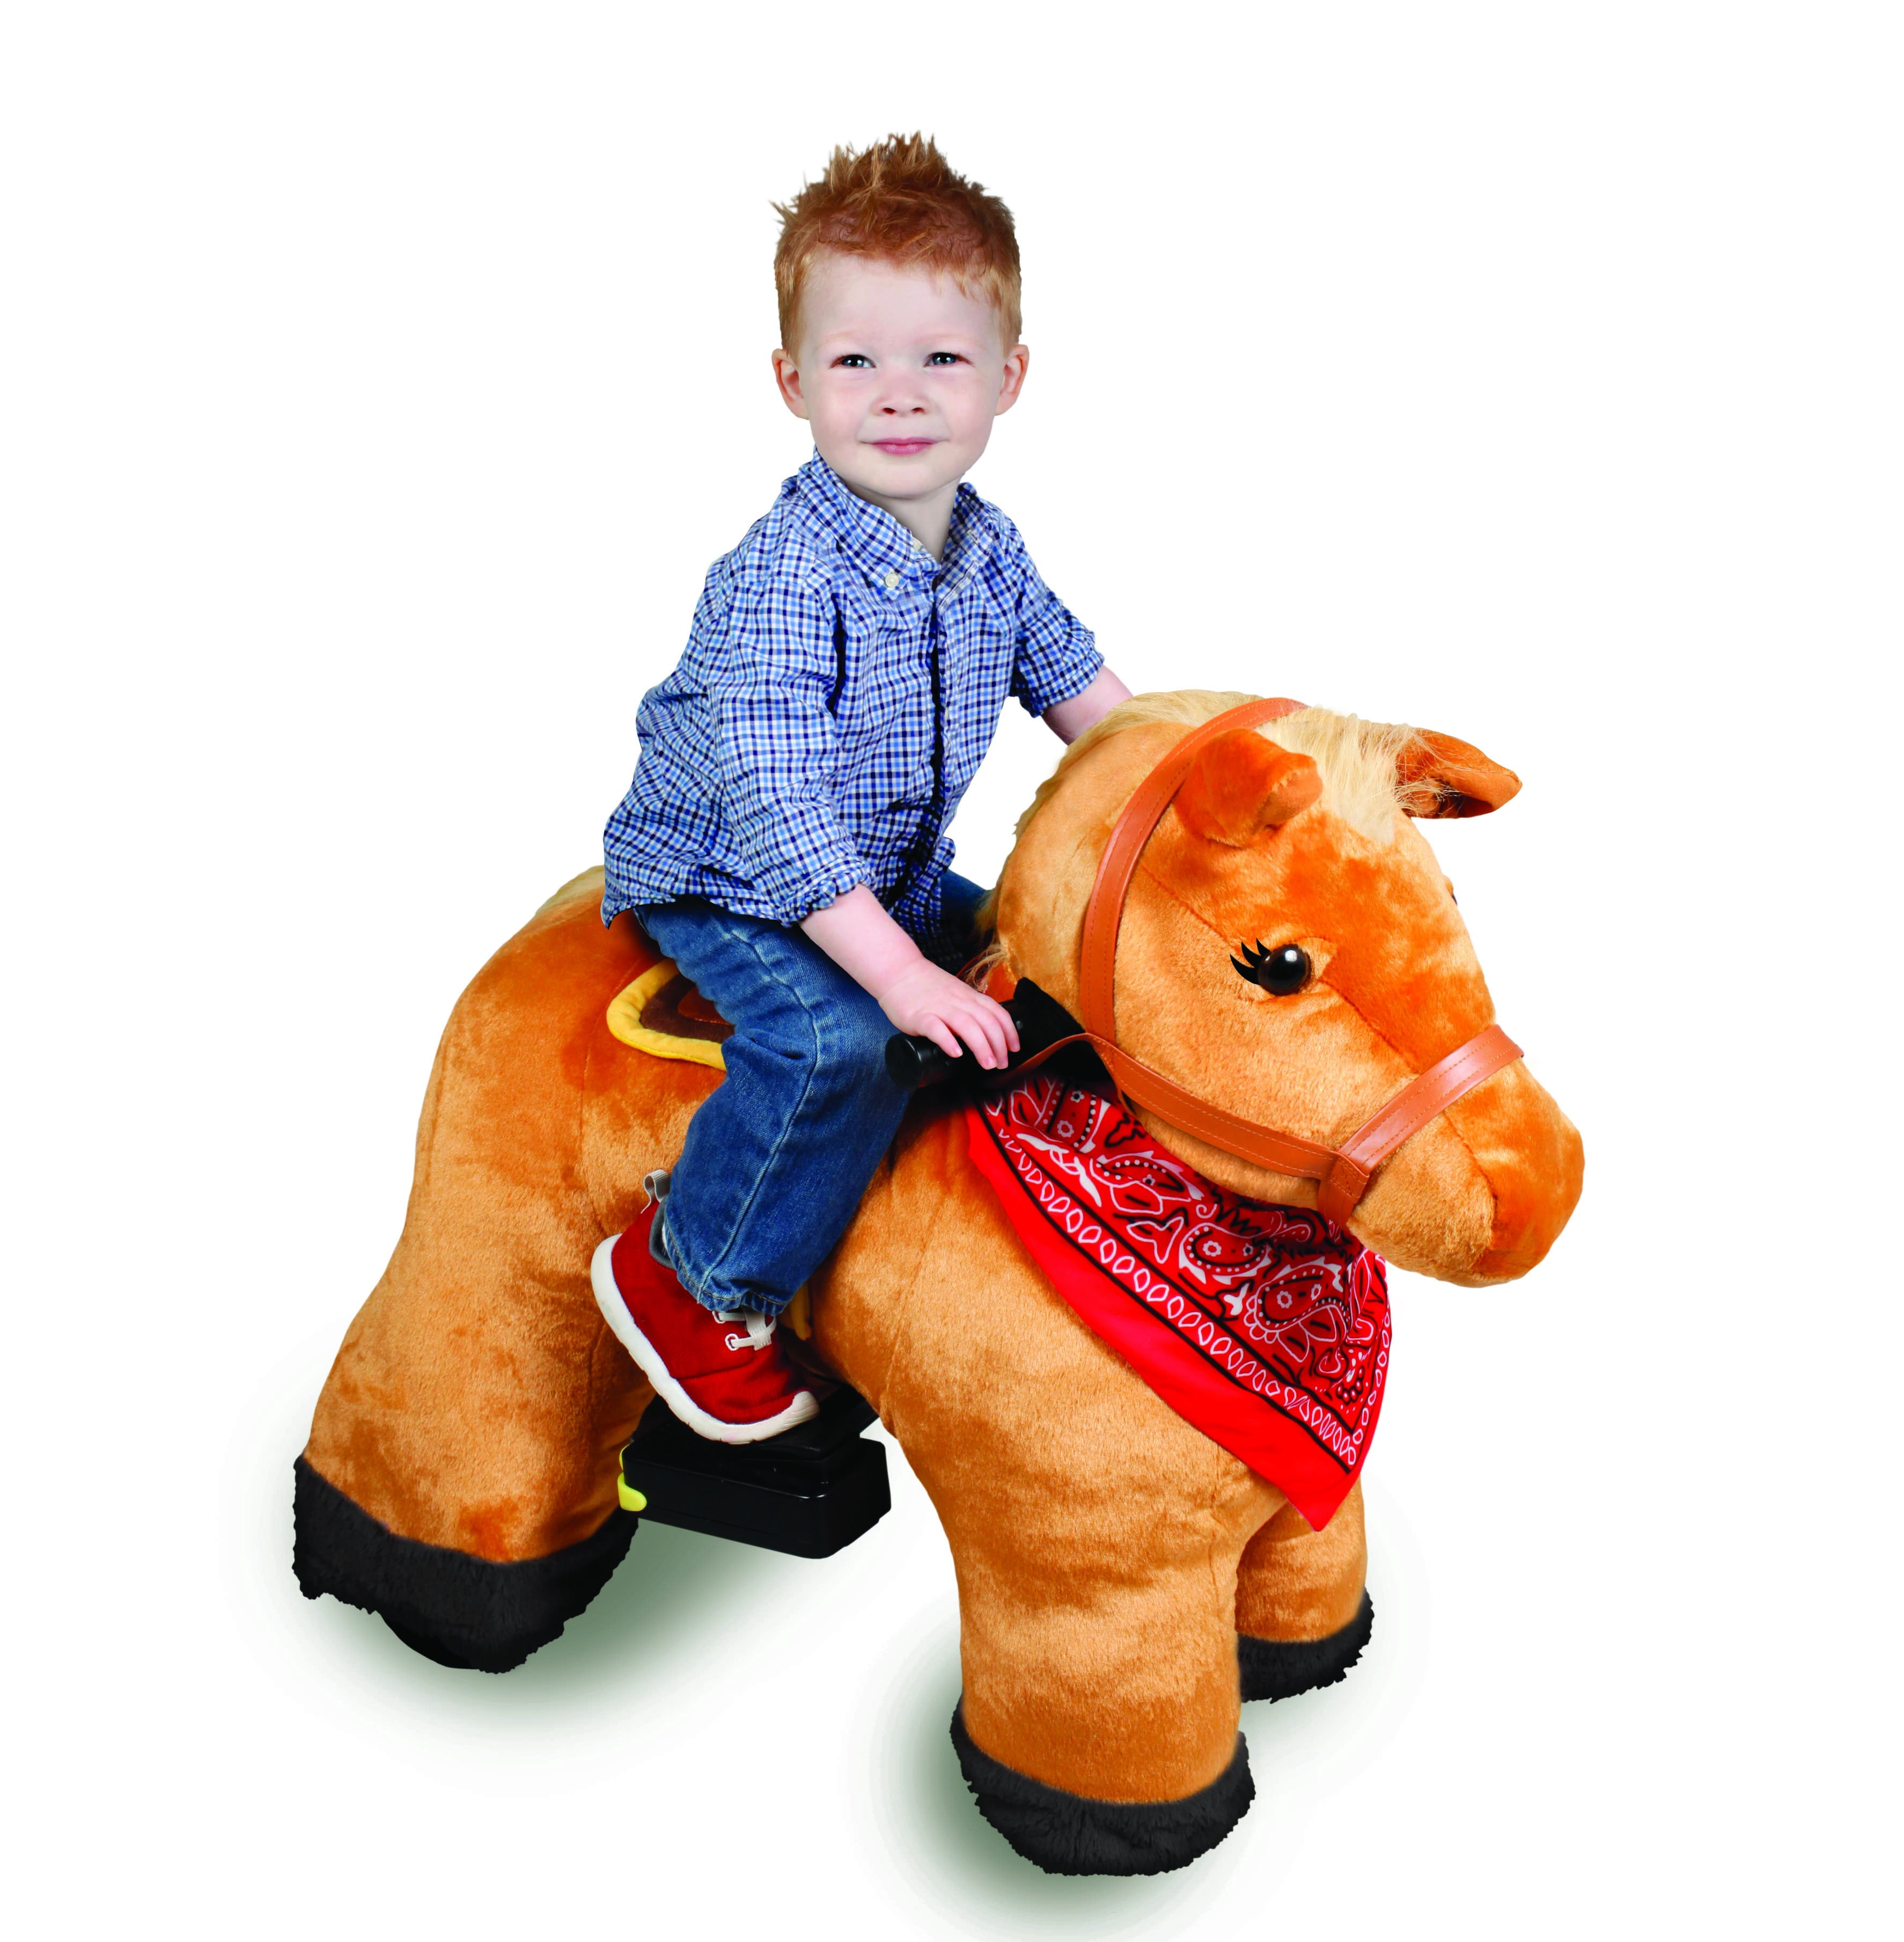 01E FUN Plush SMALL Horse/pony Ride-on scooters BROWN/WHITE kids Age 2-5 USA 